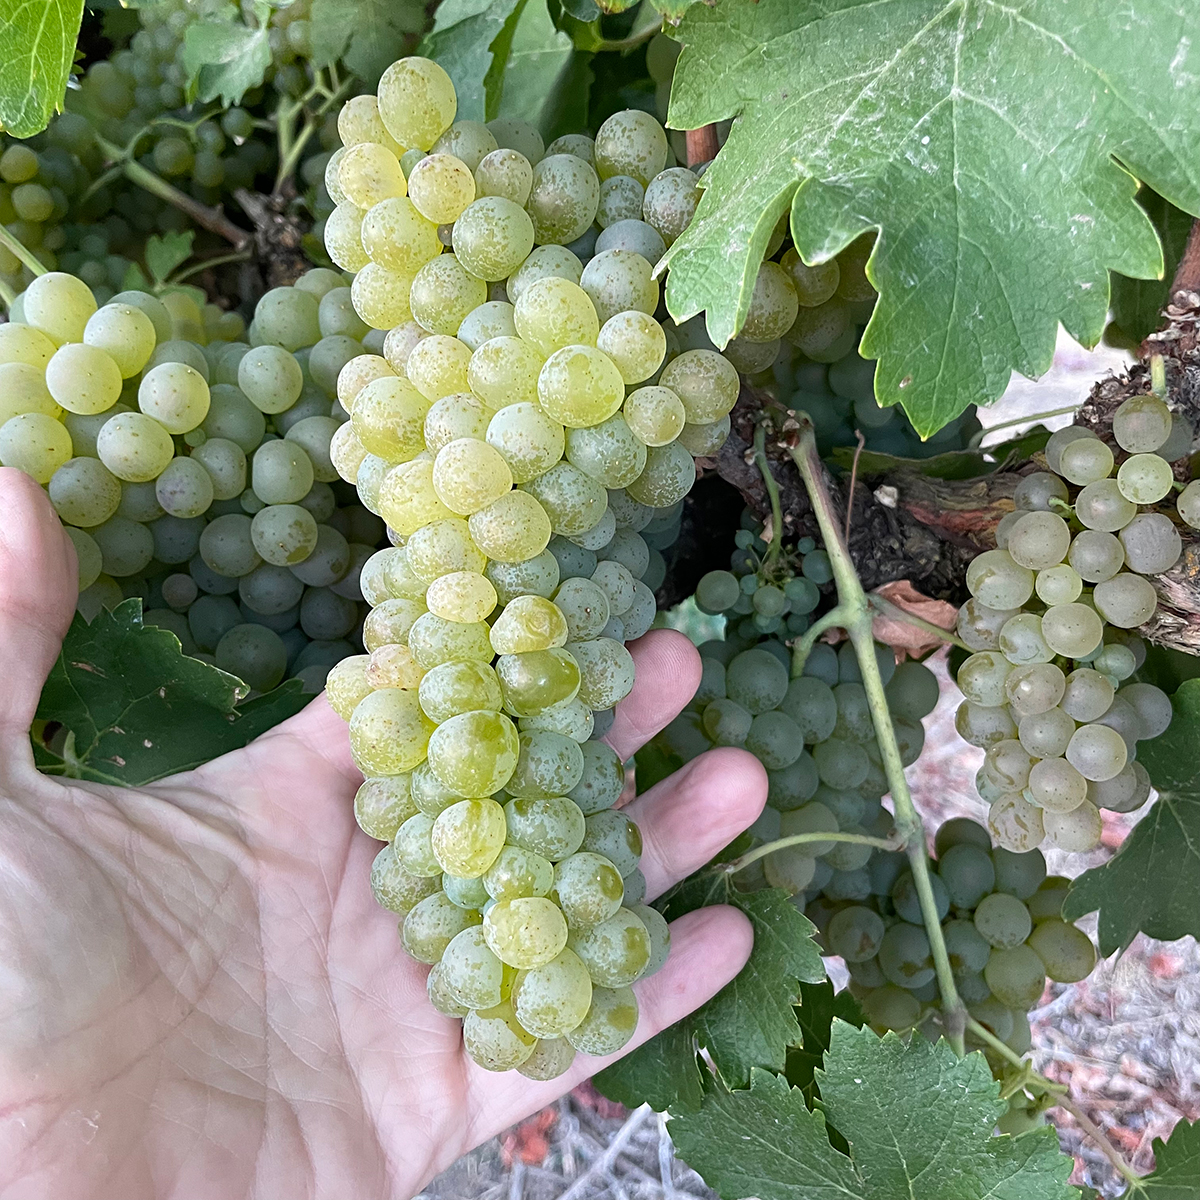 A close up of a hand holding a bunch of yellow-green grapes still attached to the vine. They look ripe and ready to pick.